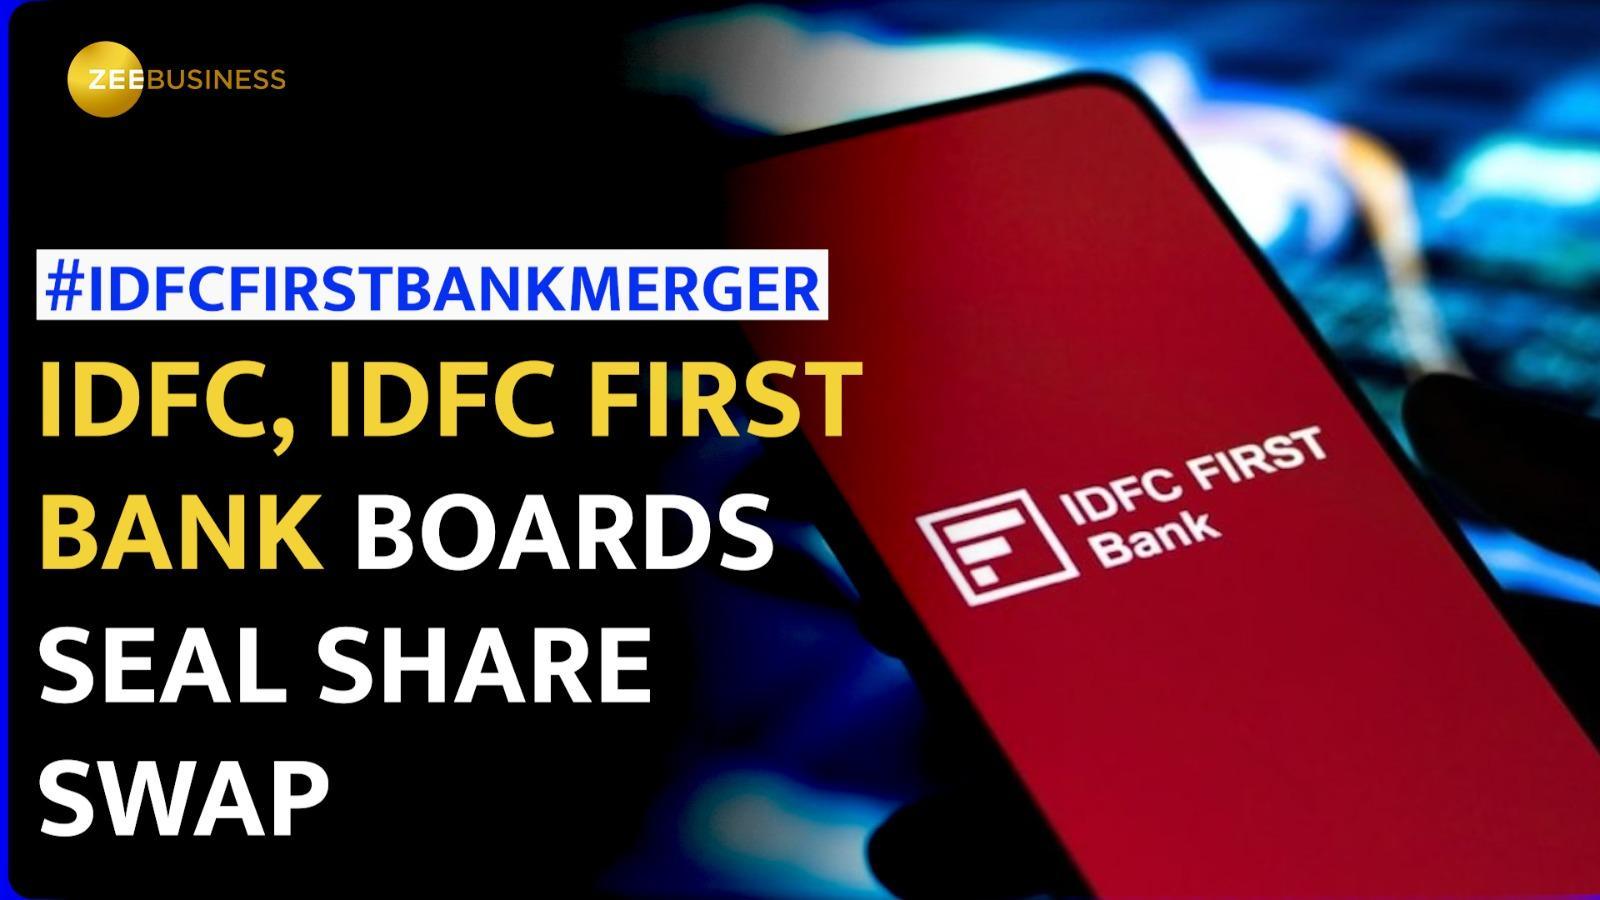 Idfc First Bank And Idfc Ltd Merger What Does It Mean For Shareholders 0162